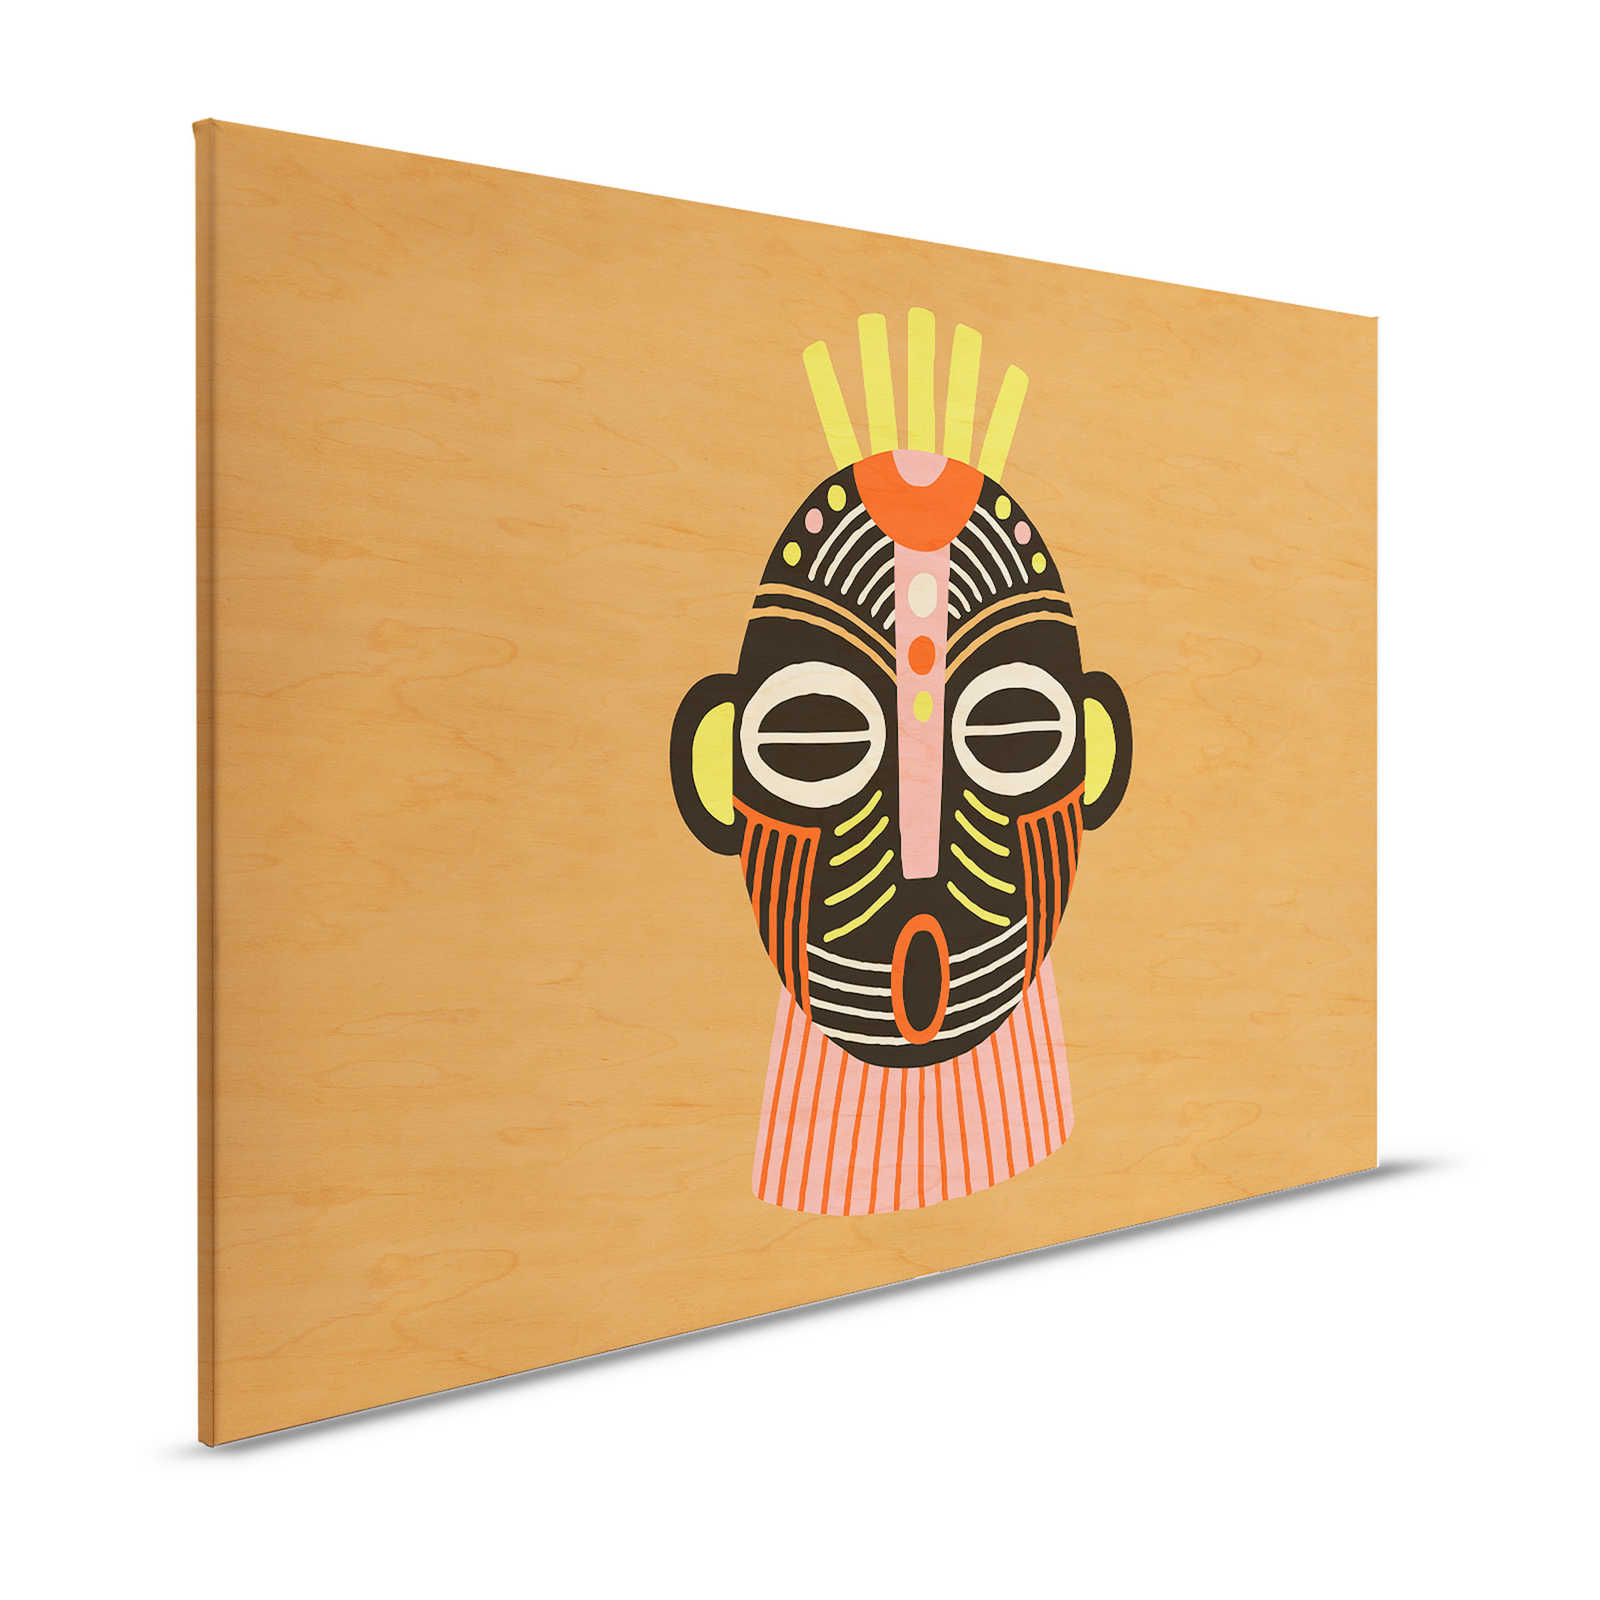 Overseas 4 - Canvas painting Africa Design Inspiration Mask - 1.20 m x 0.80 m
